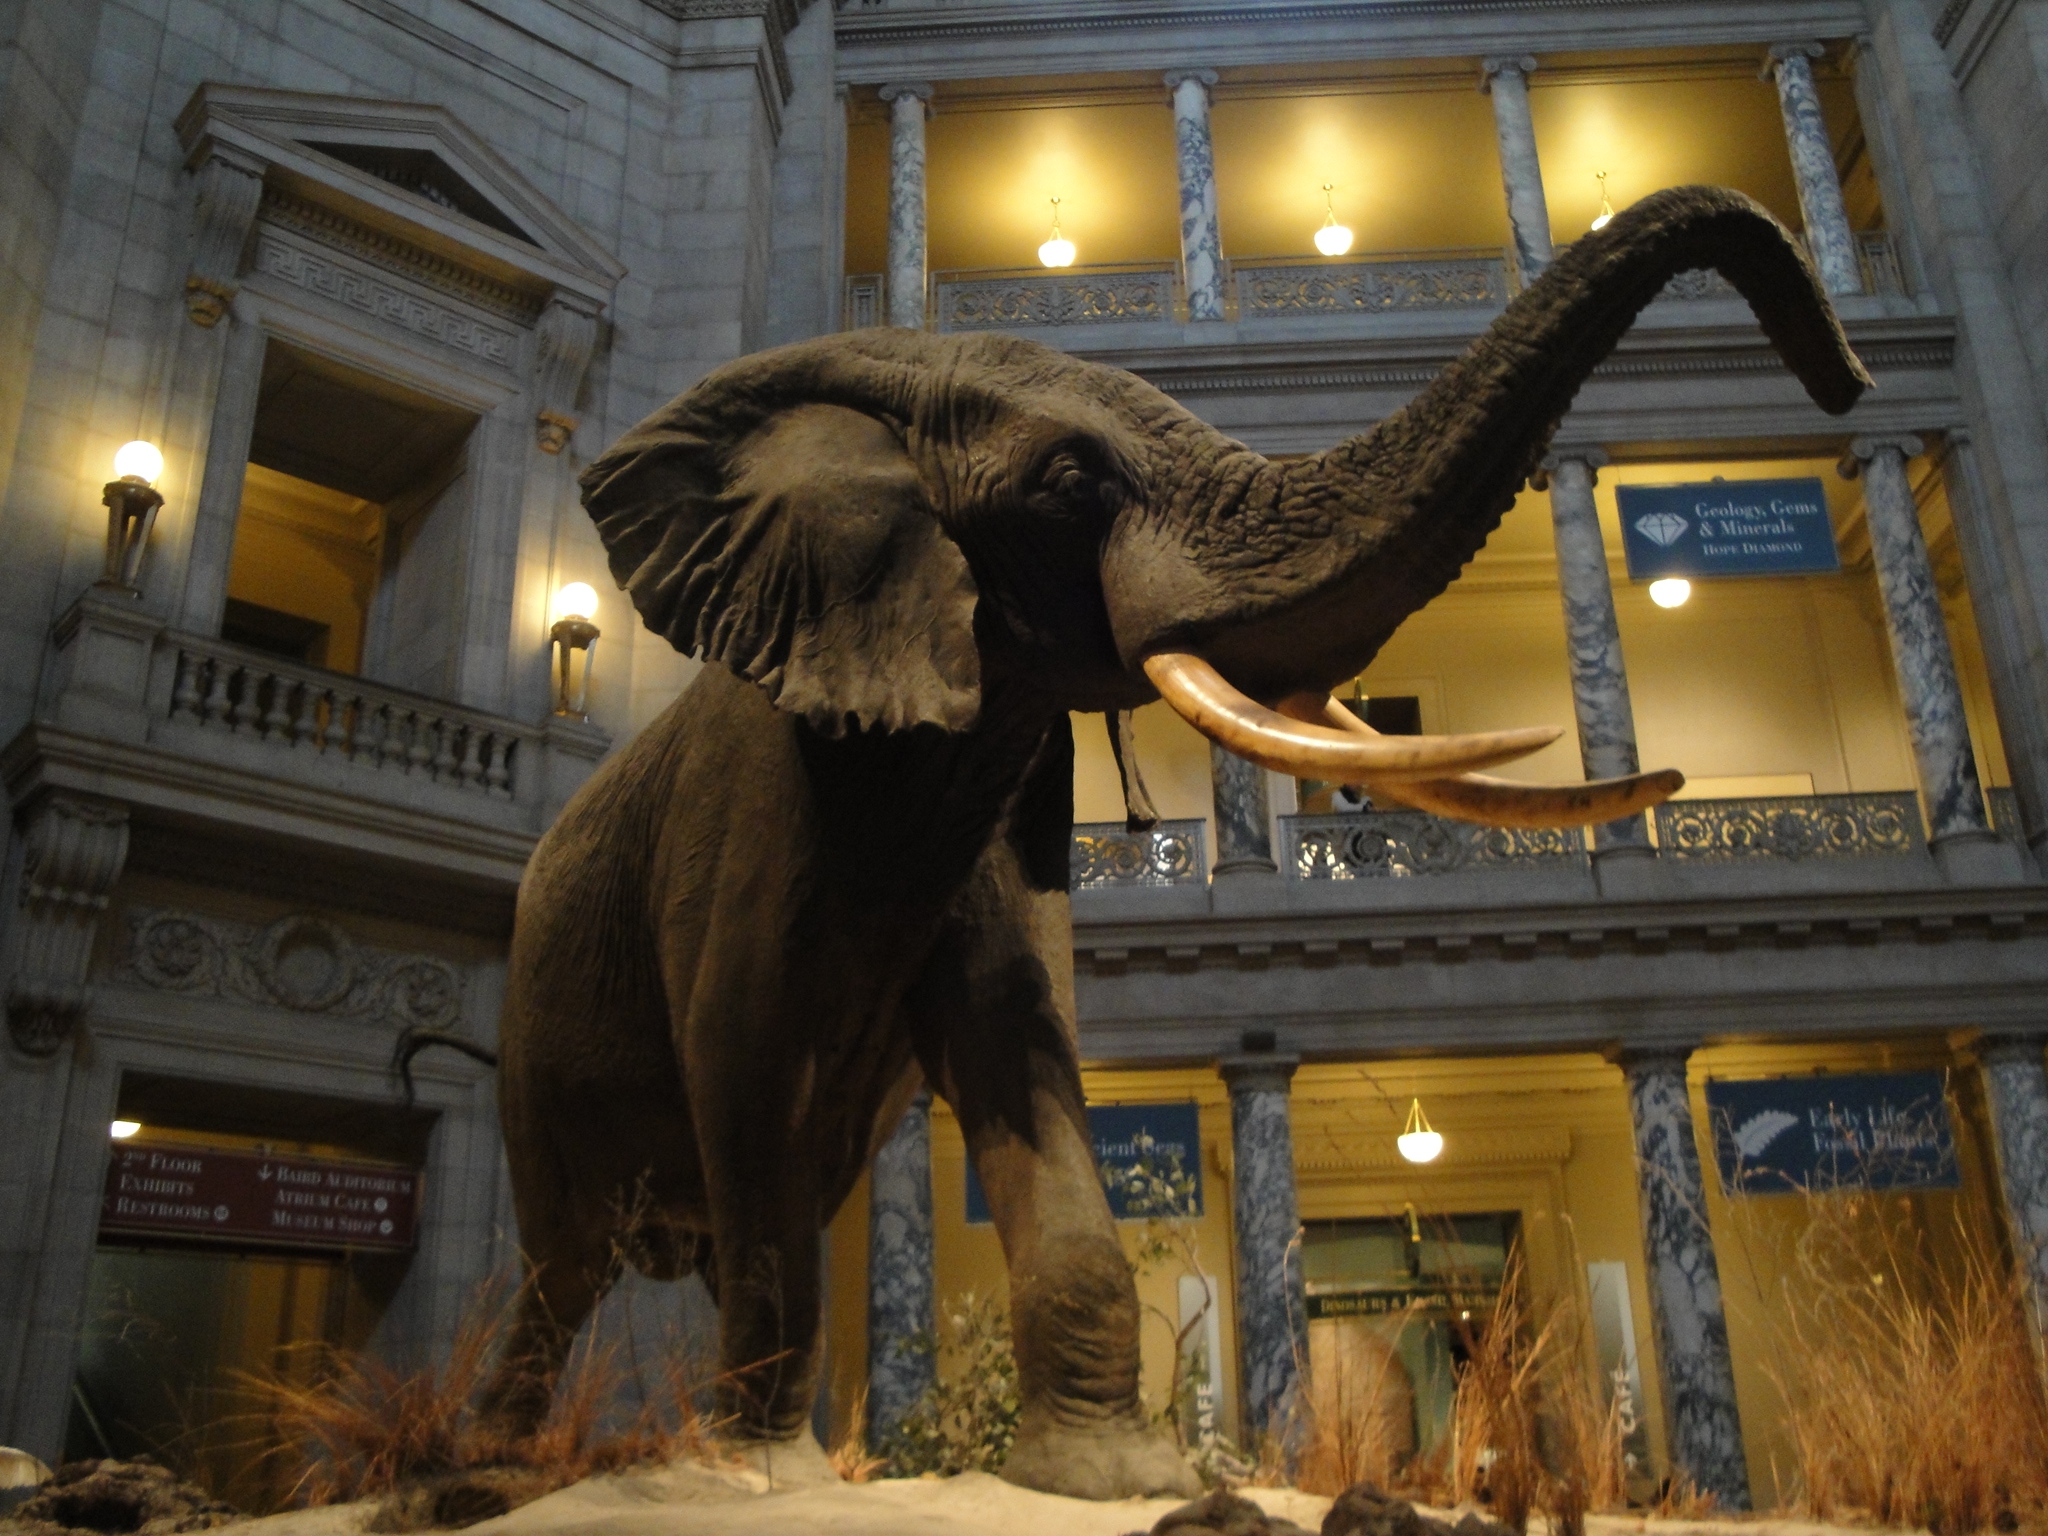 Smithsonian Museum of Natural History